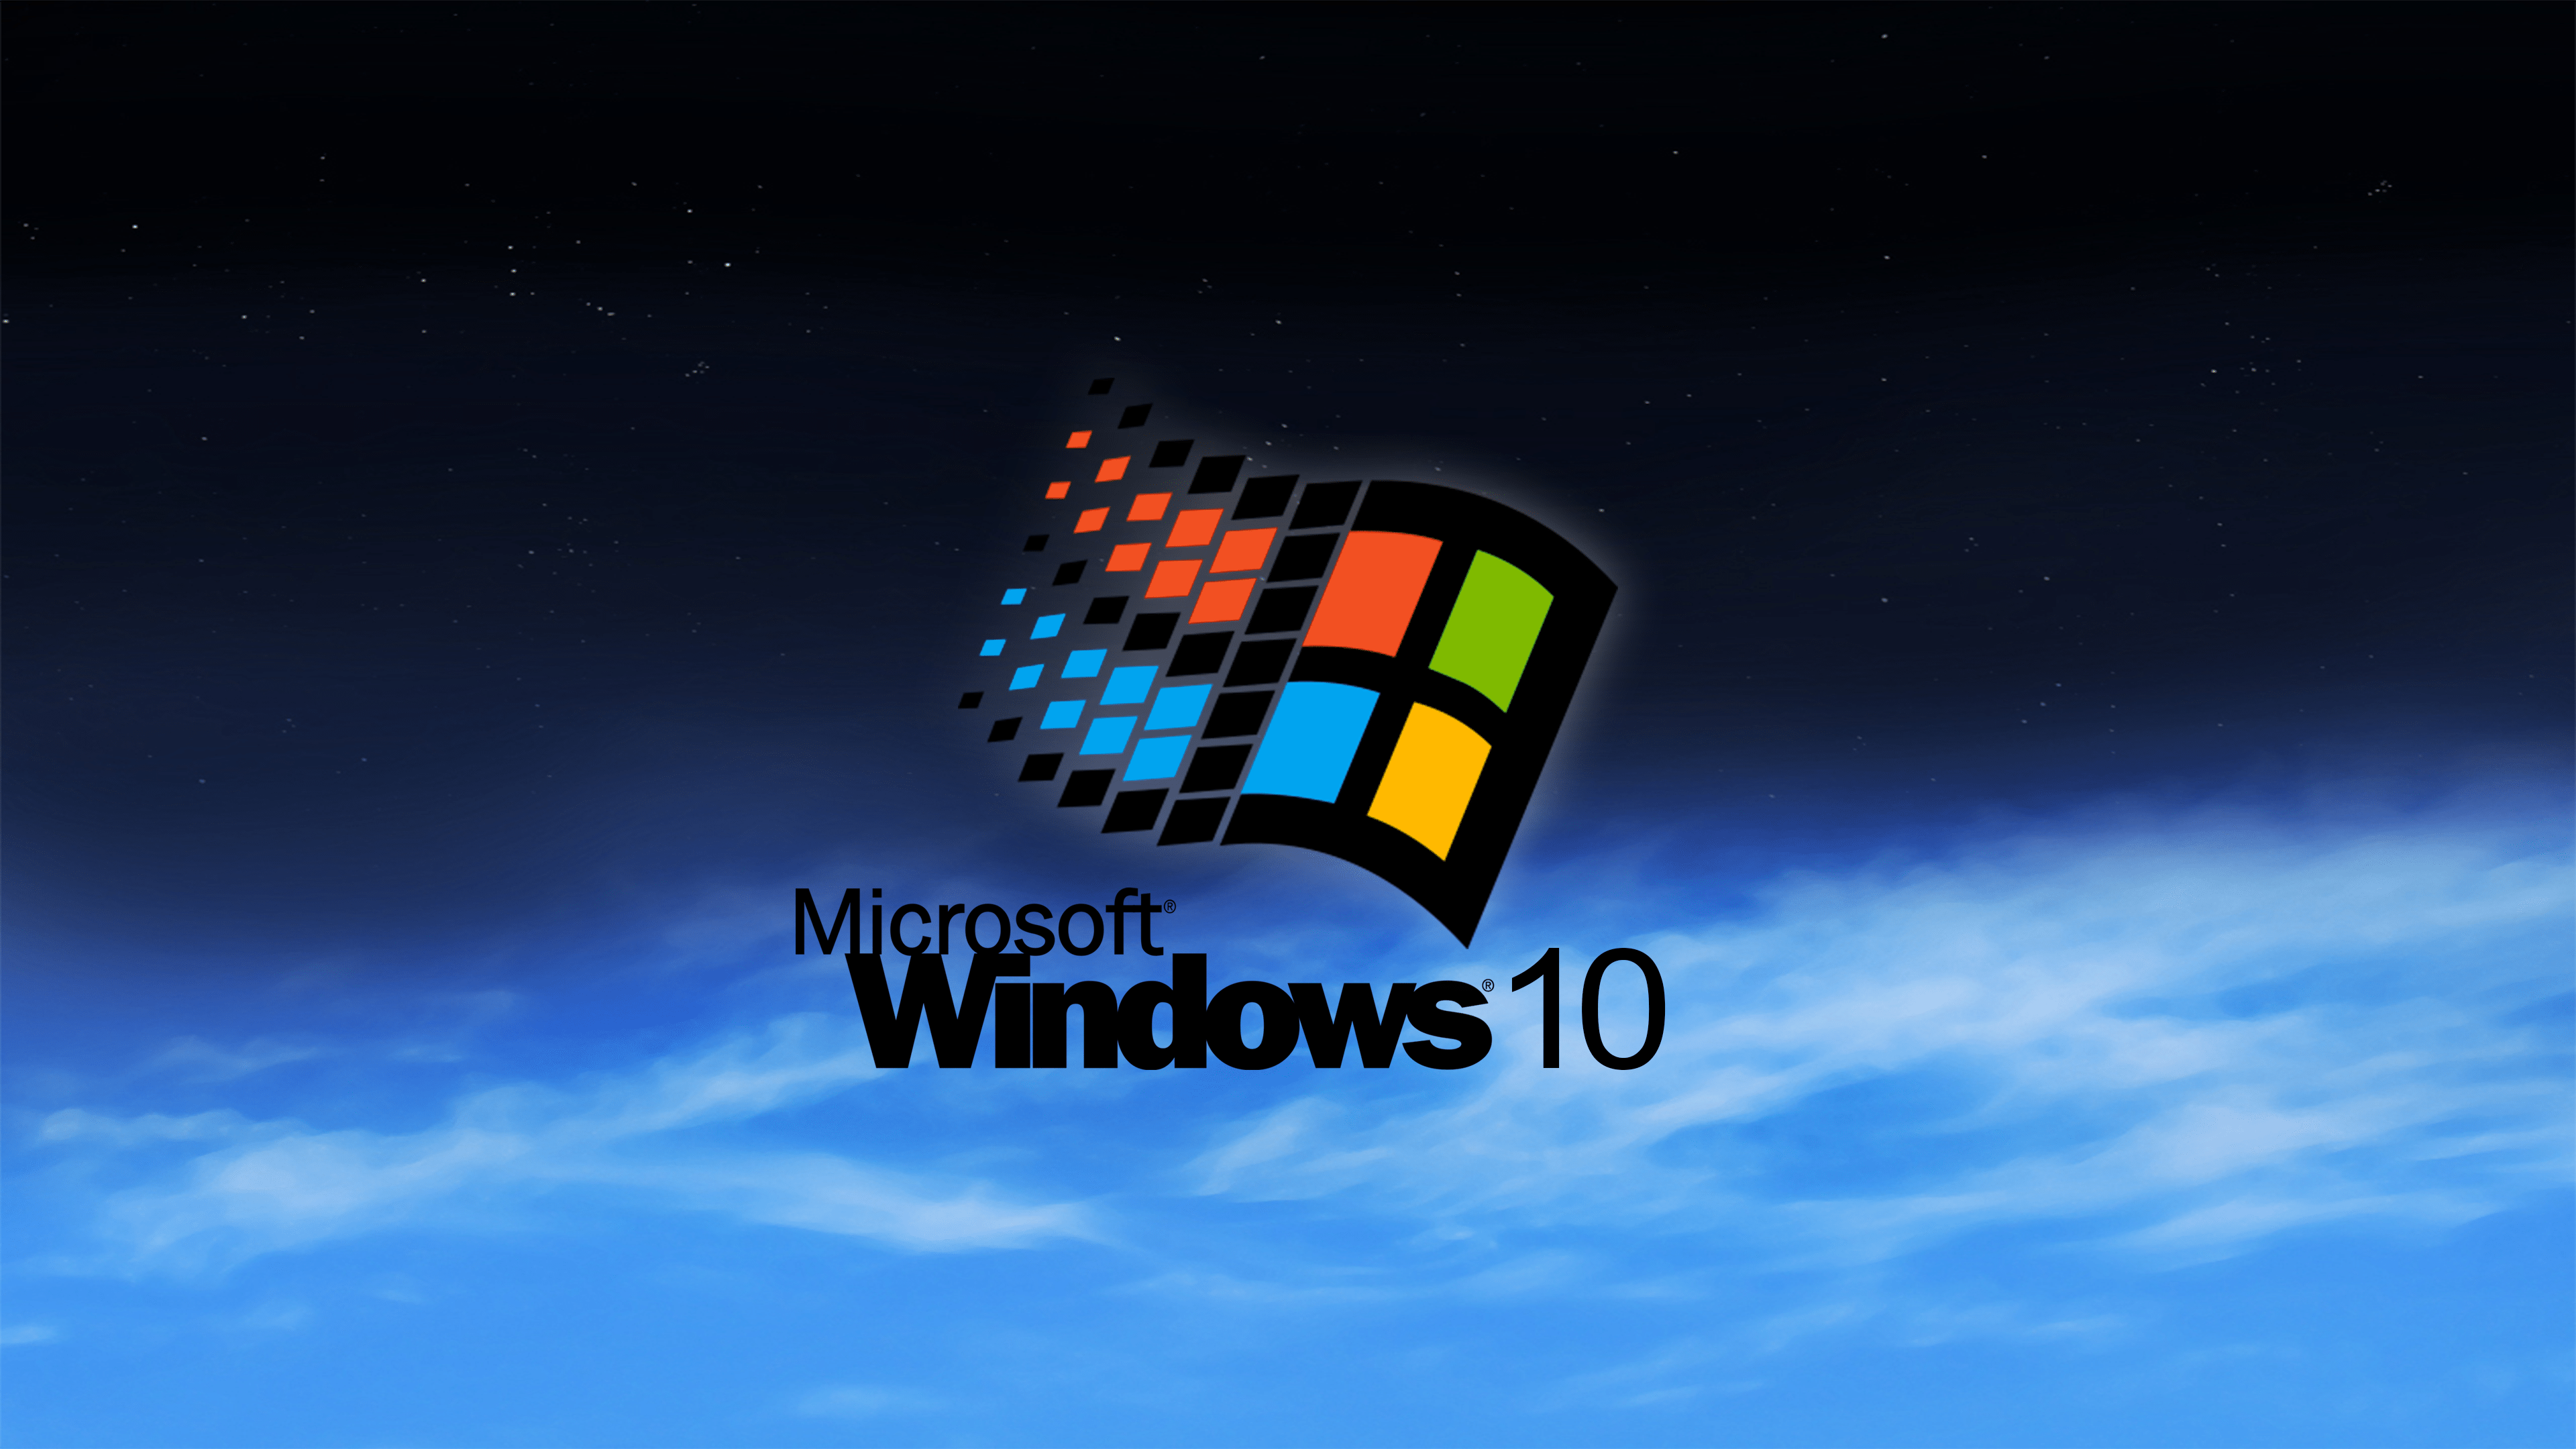 Windows 95 Wallpapers Top Free Windows 95 Backgrounds Wallpaperaccess